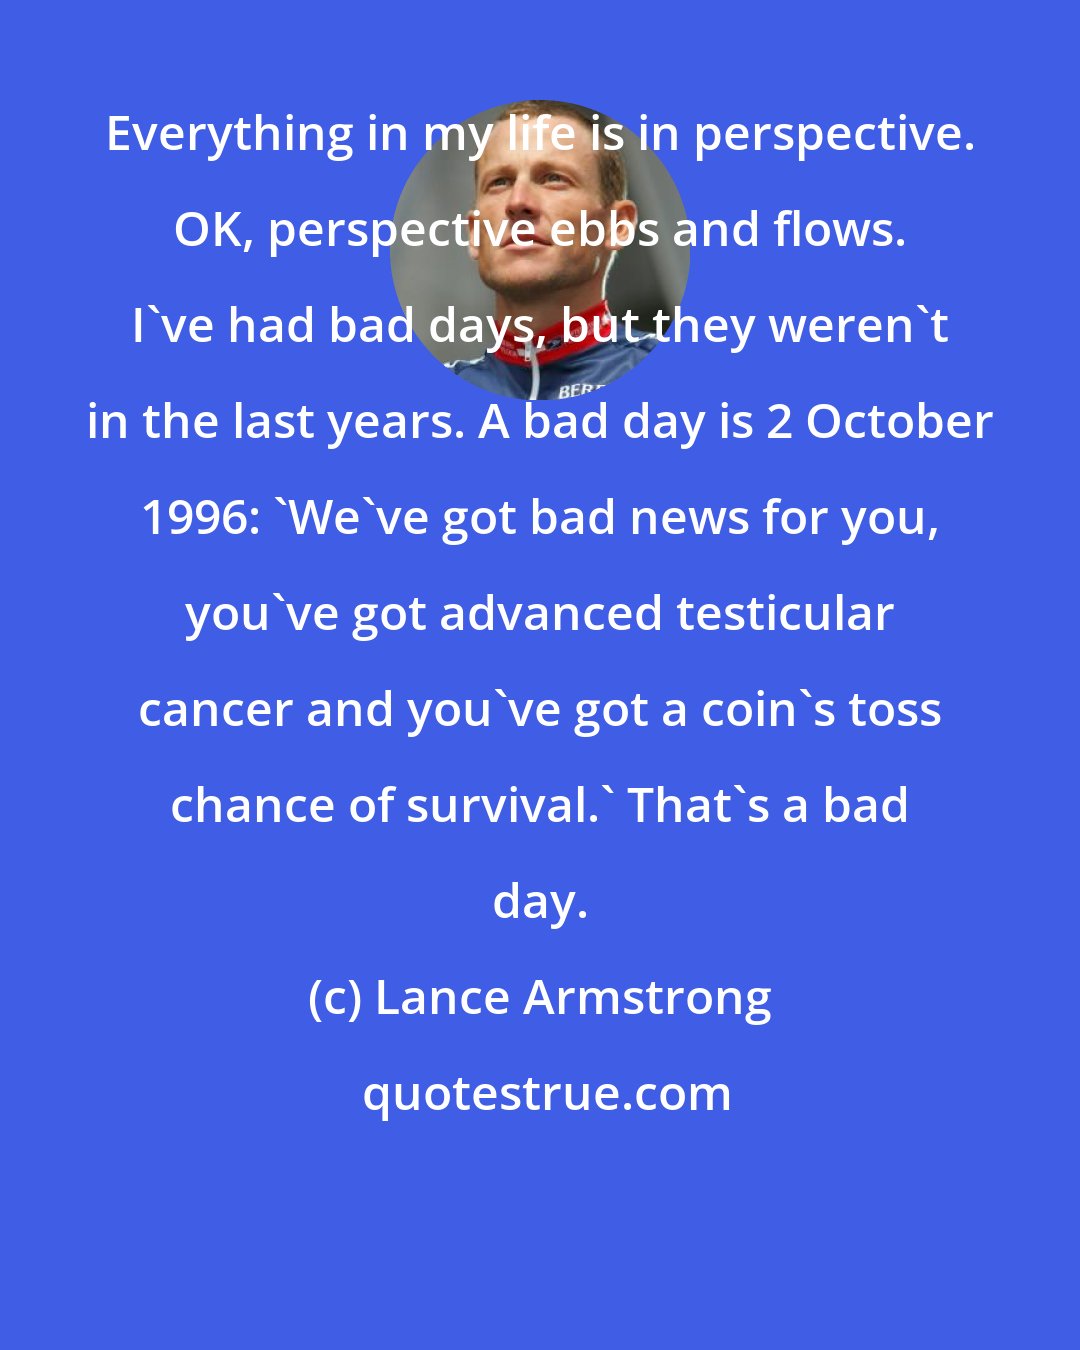 Lance Armstrong: Everything in my life is in perspective. OK, perspective ebbs and flows. I've had bad days, but they weren't in the last years. A bad day is 2 October 1996: 'We've got bad news for you, you've got advanced testicular cancer and you've got a coin's toss chance of survival.' That's a bad day.